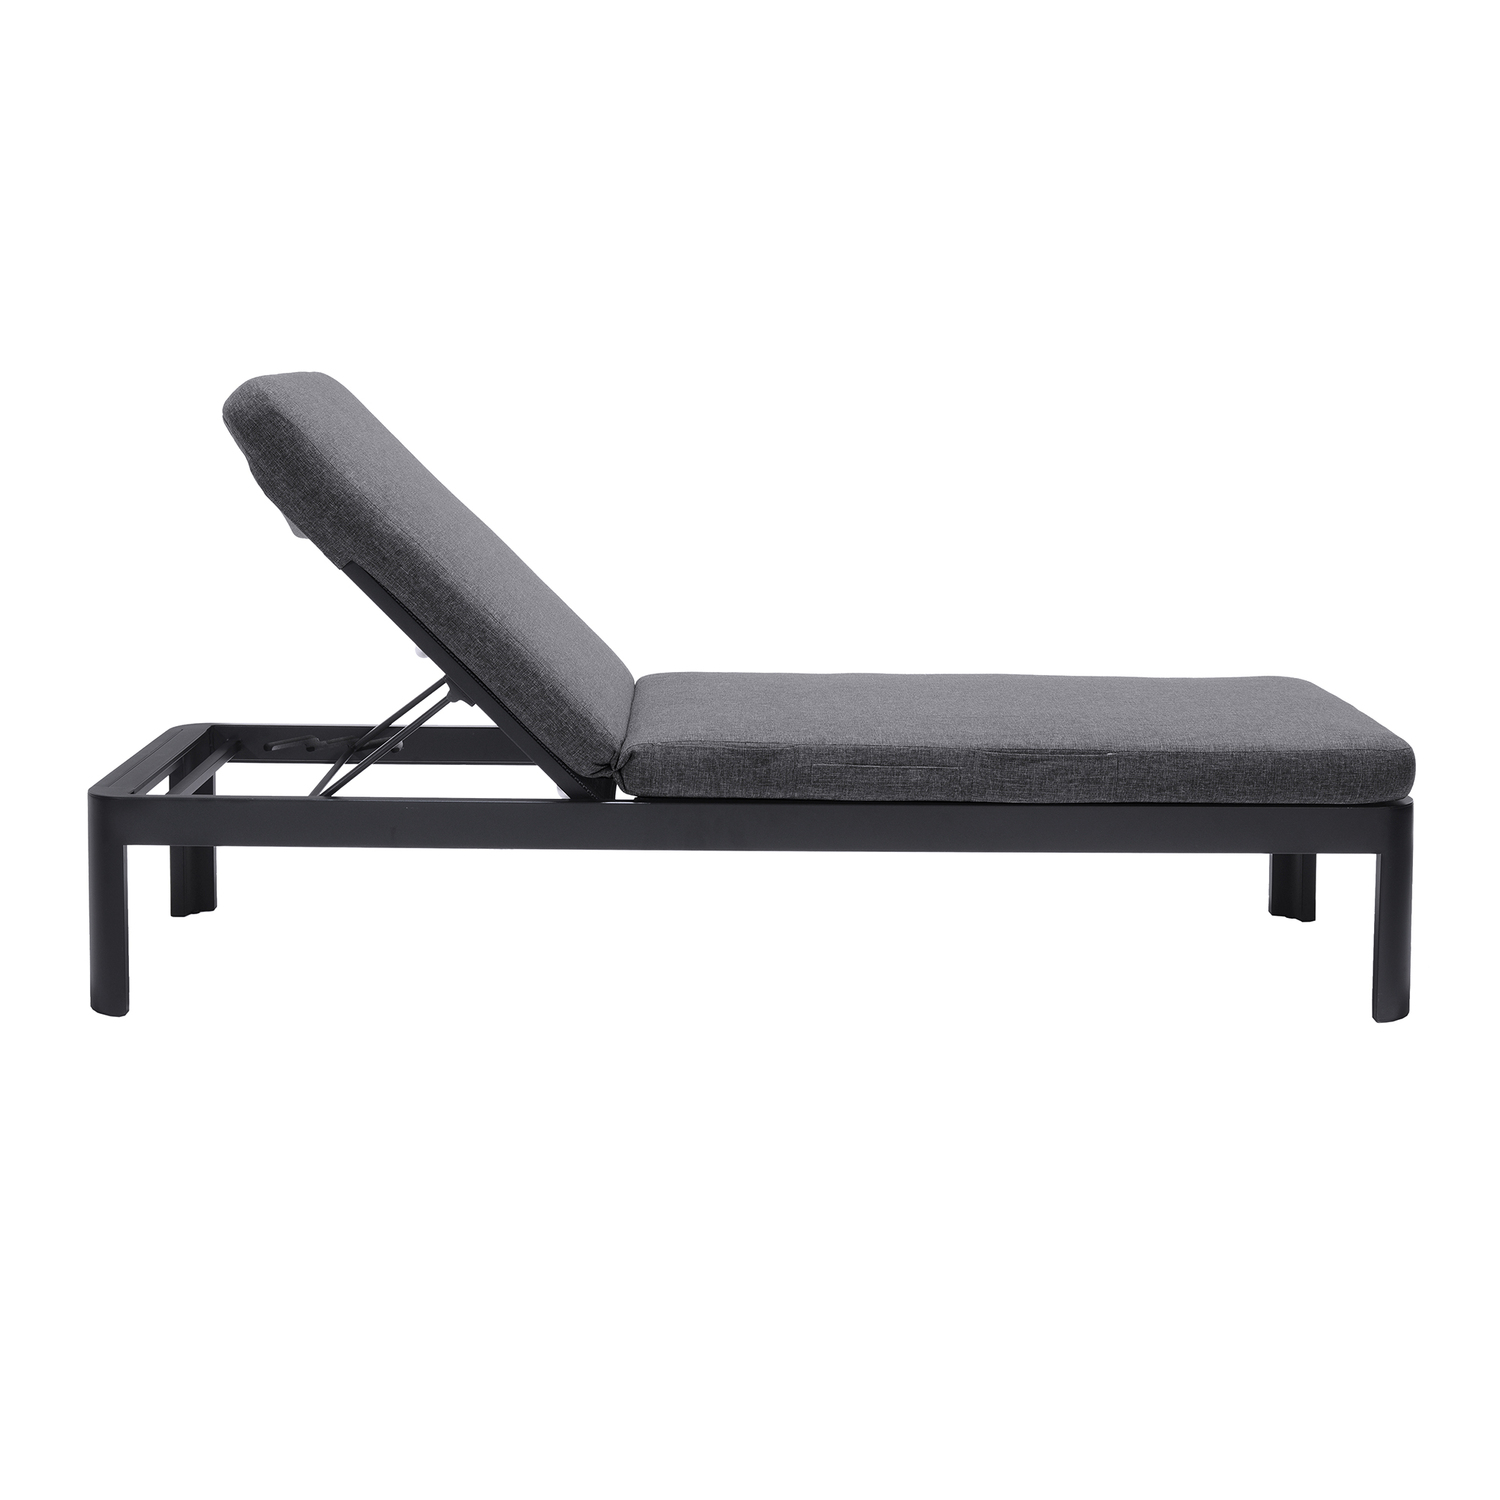 Portals Outdoor Chaise Lounge Chair in Black Finish and Grey Cushions - image 3 of 5